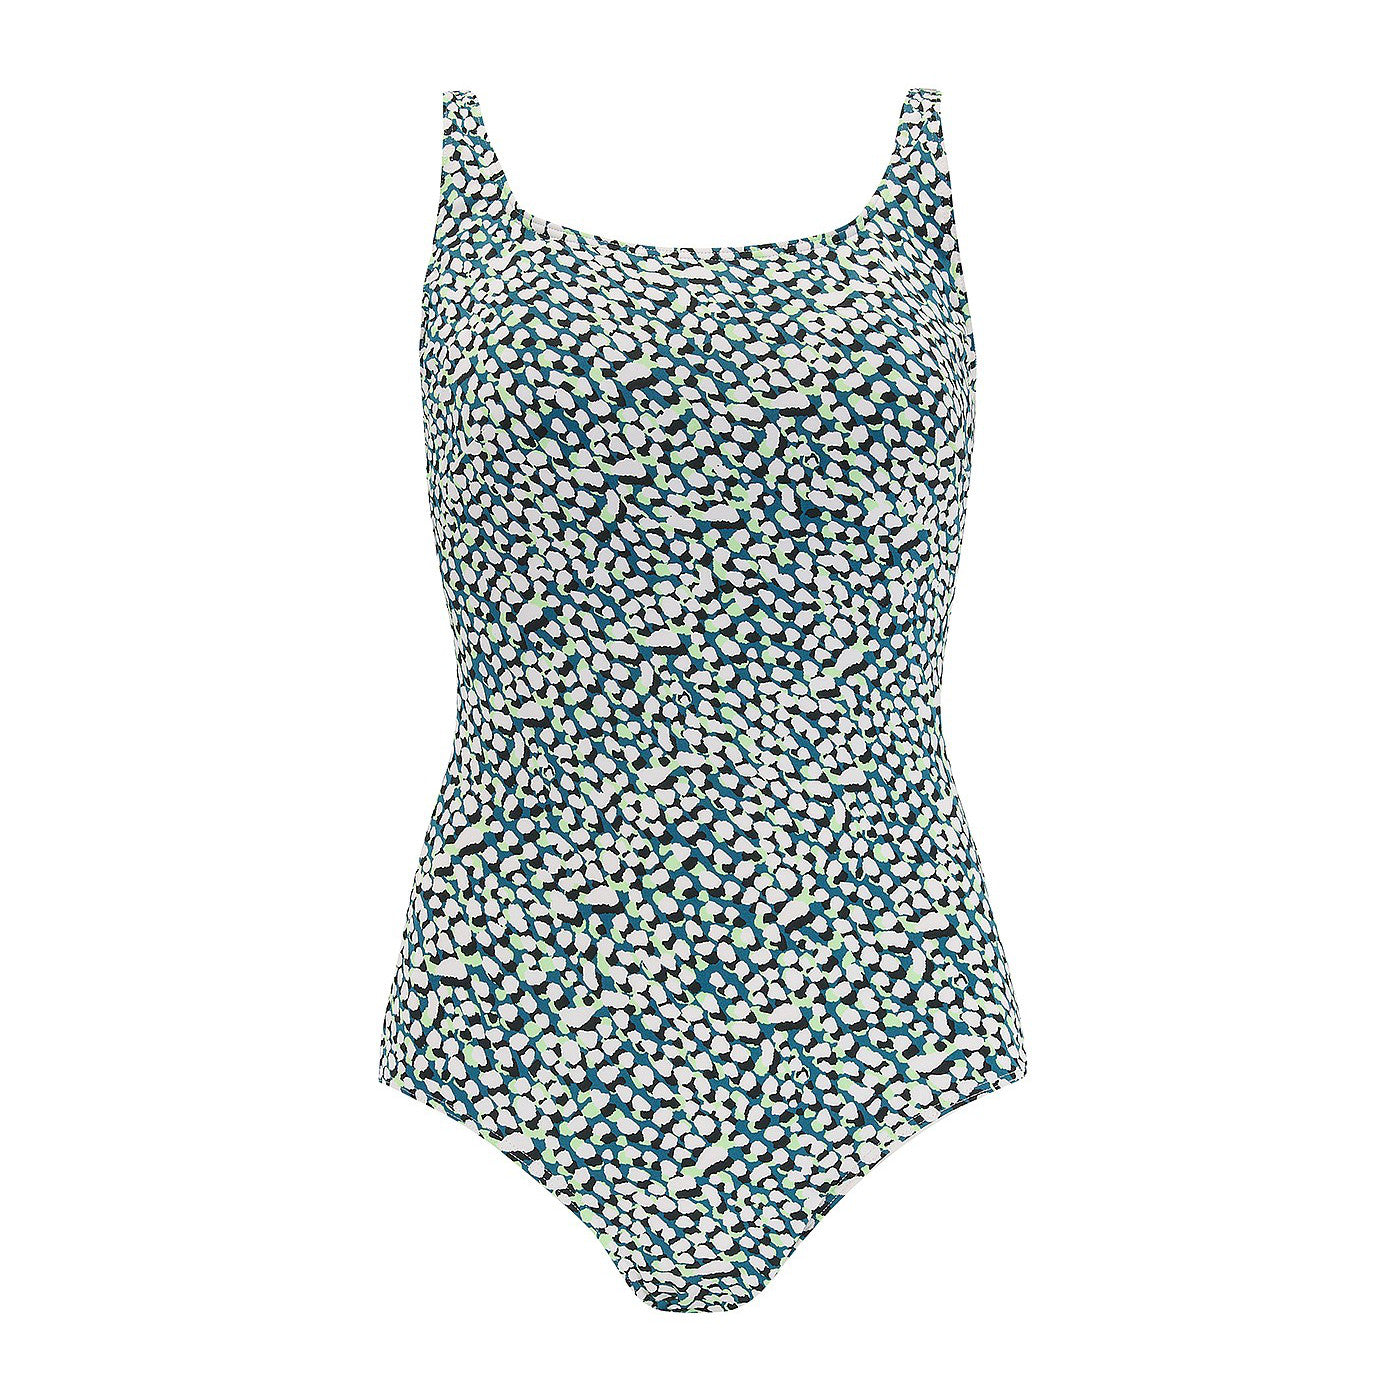 Zante Swimsuit  | Swimwear from Nicola Jane | Pocketed mastectomy swimwear for women touched by breast cancer